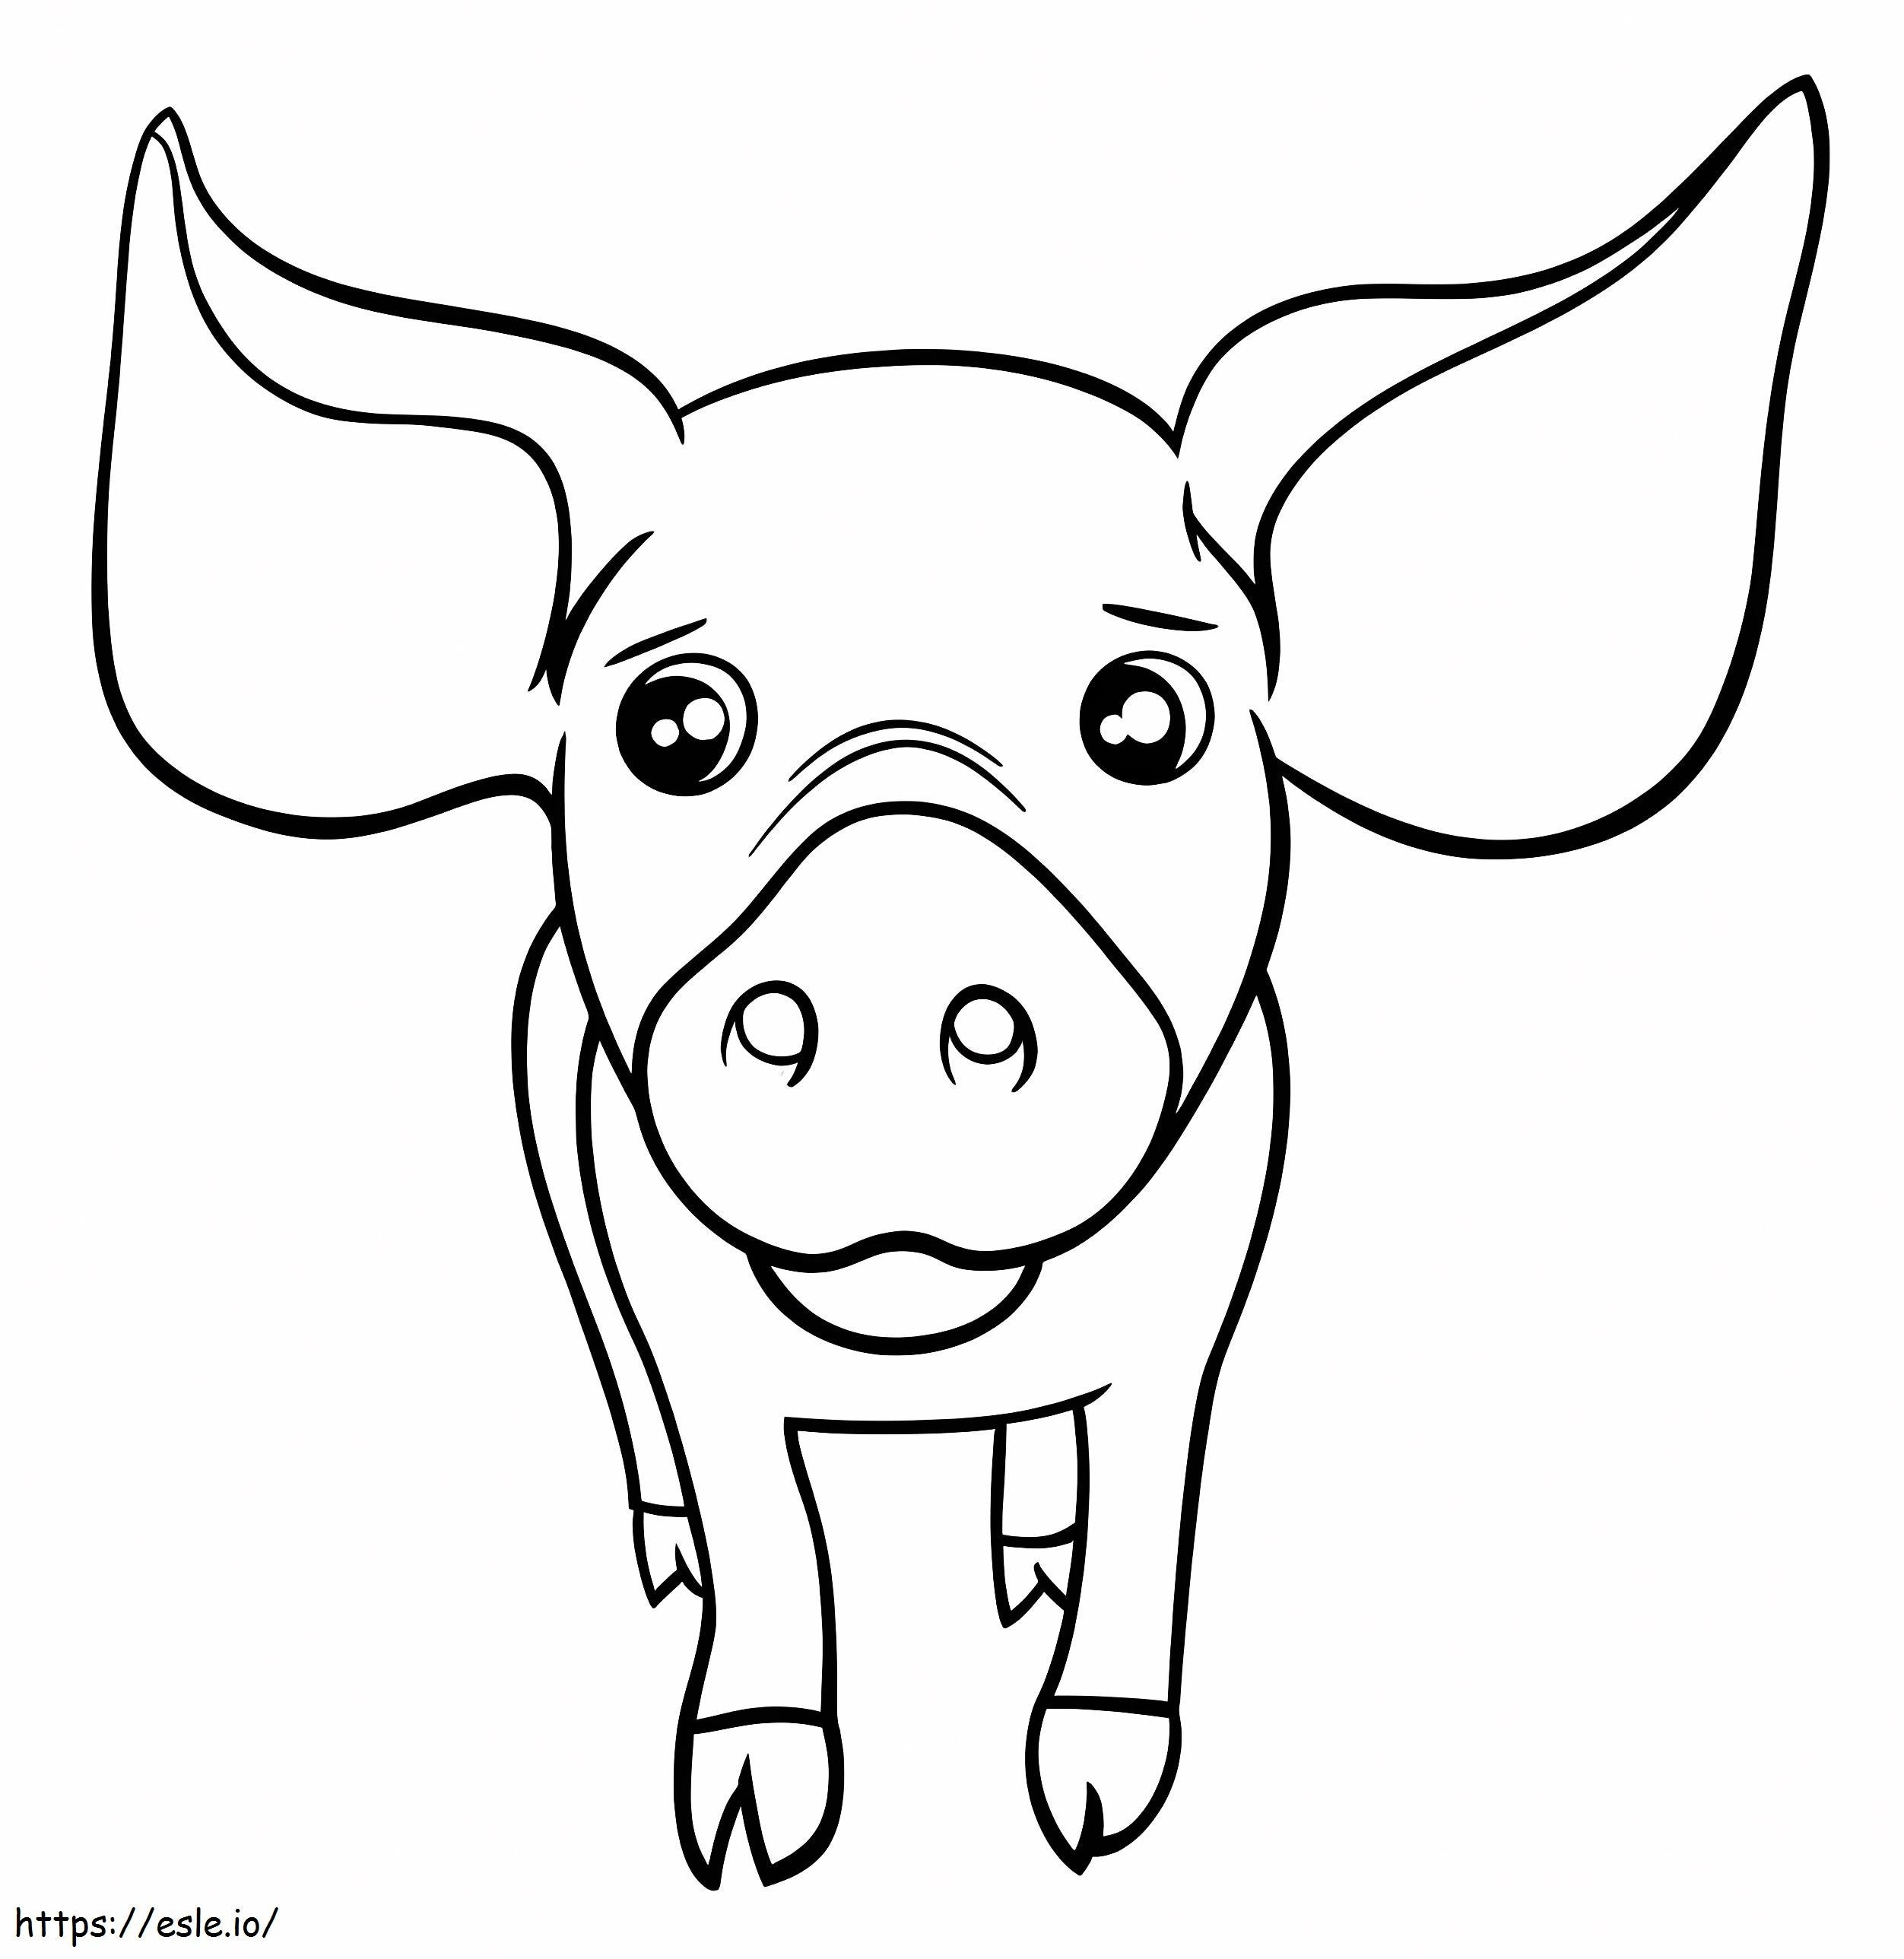 Adorable Pig coloring page